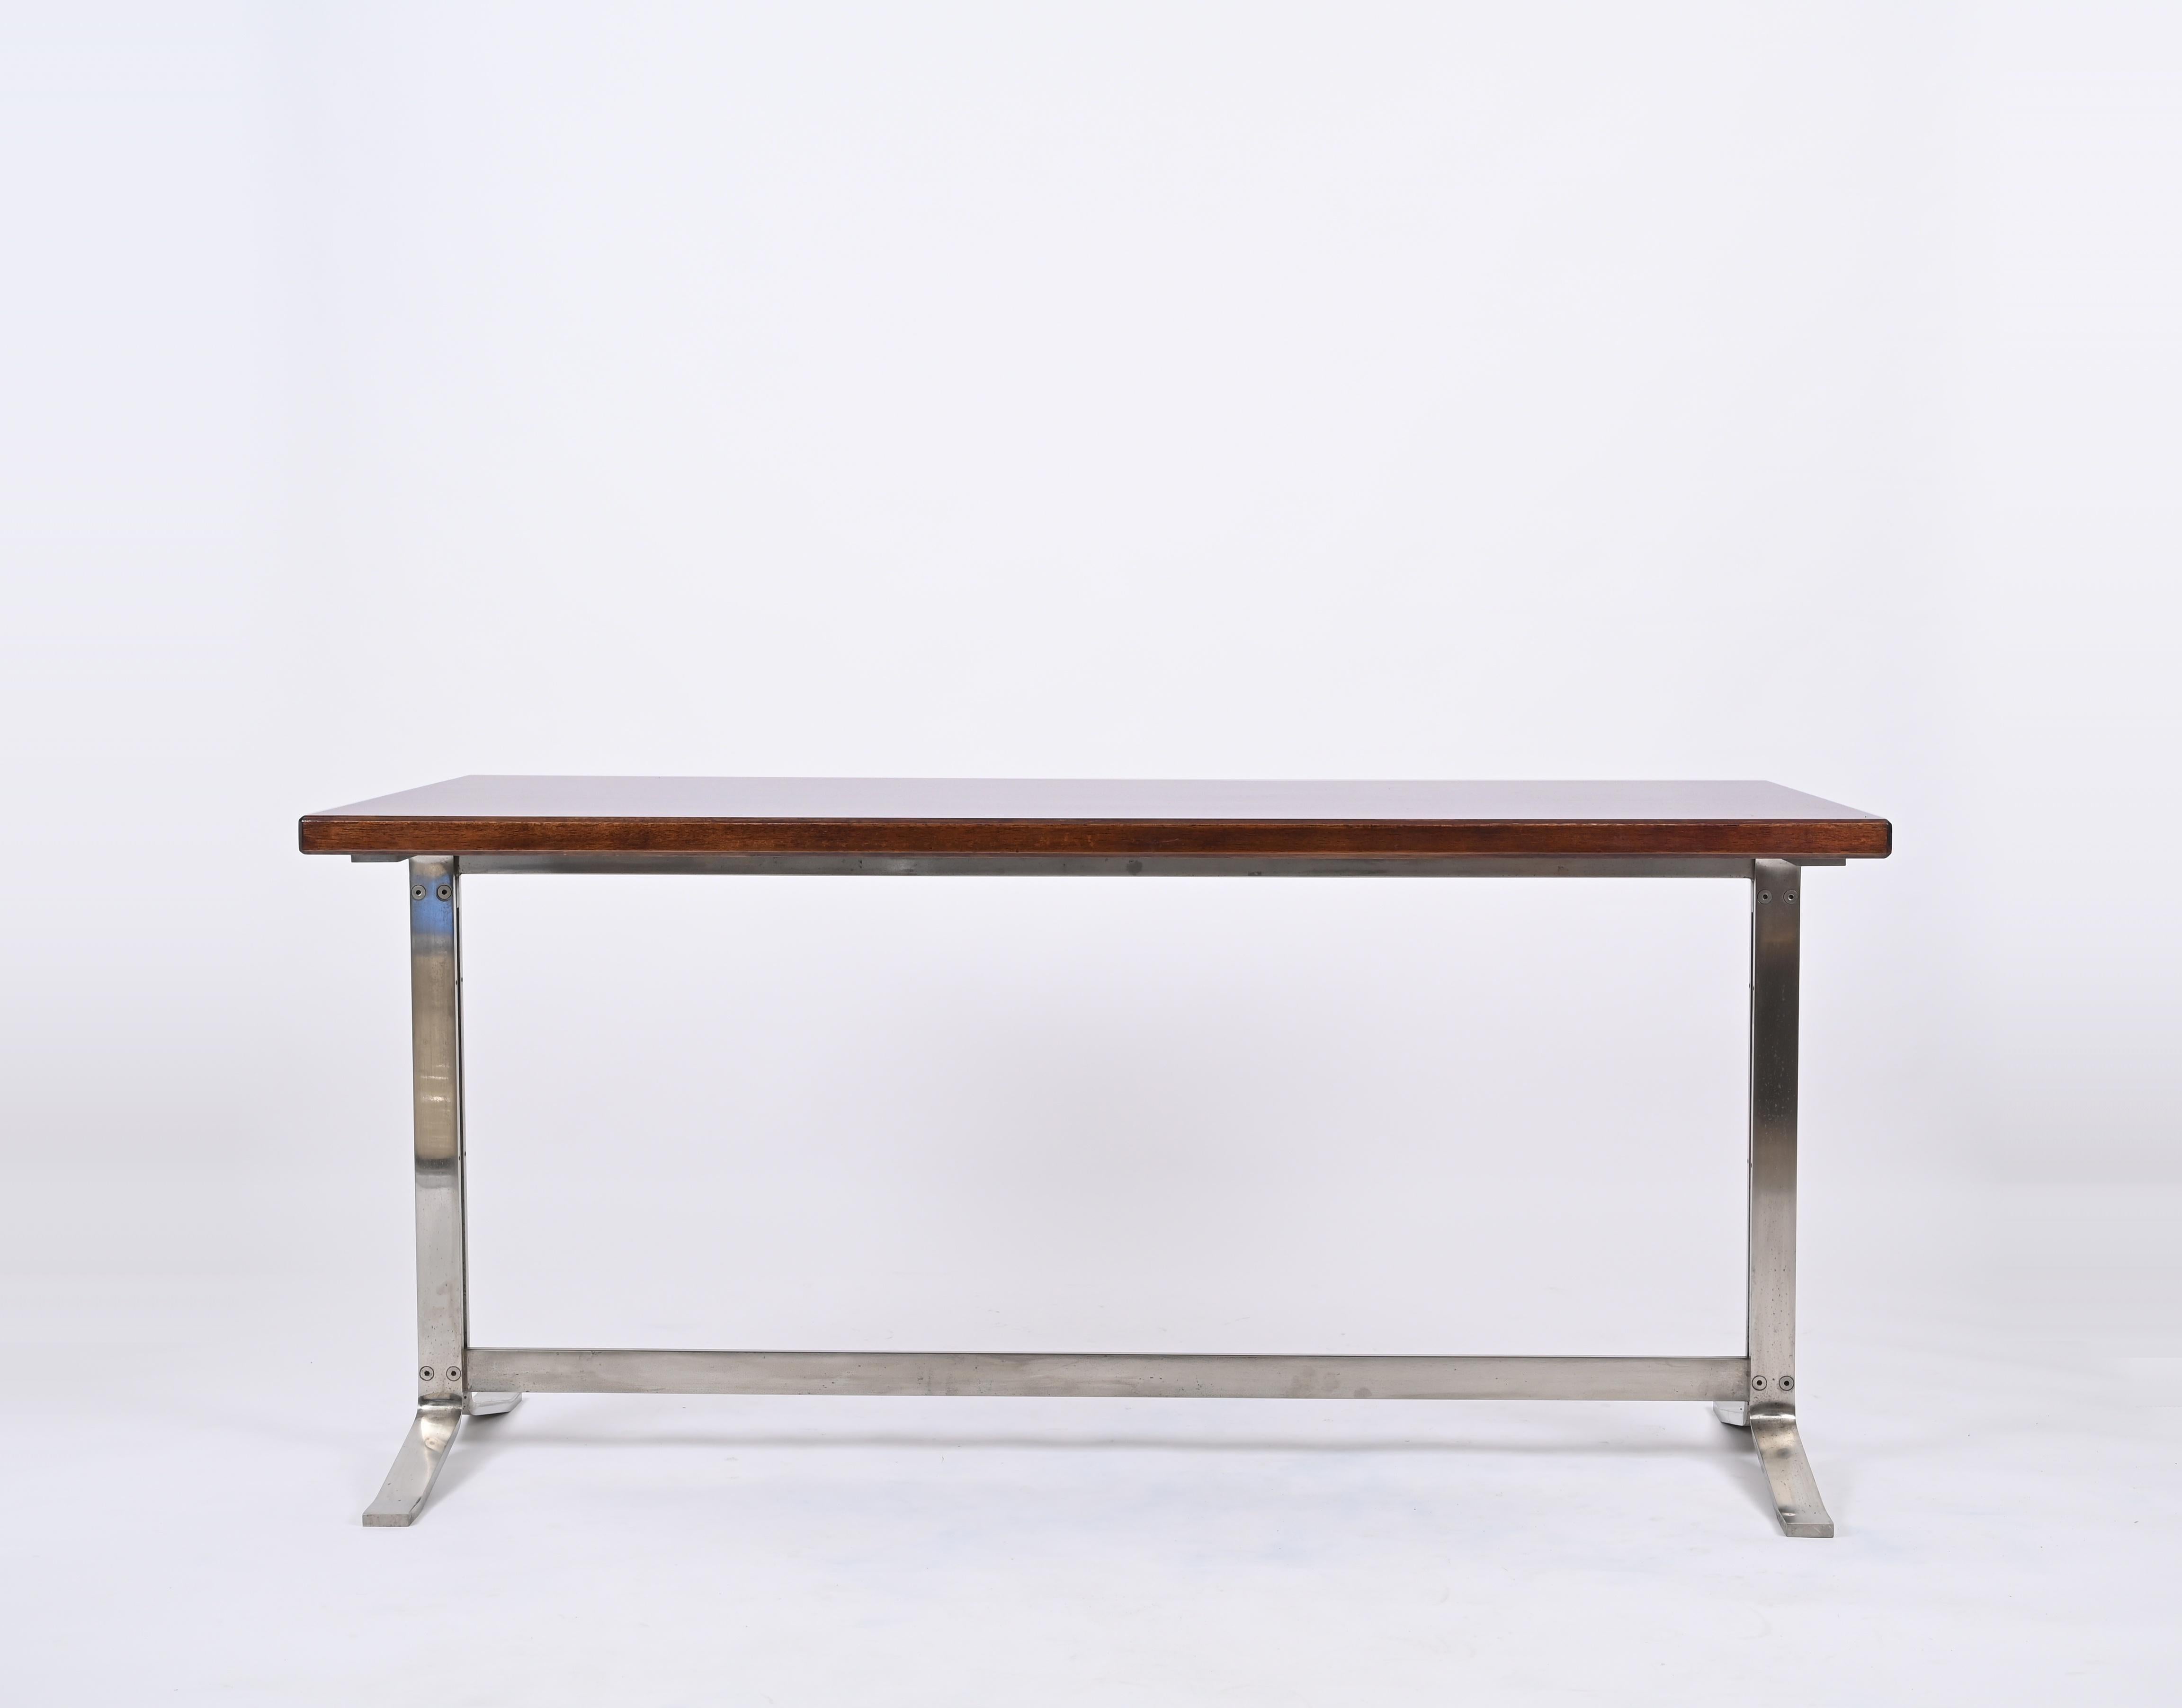 Midcentury Desk in Walnut and Steel by Moscatelli for Formanova, Italy, 1965 For Sale 2